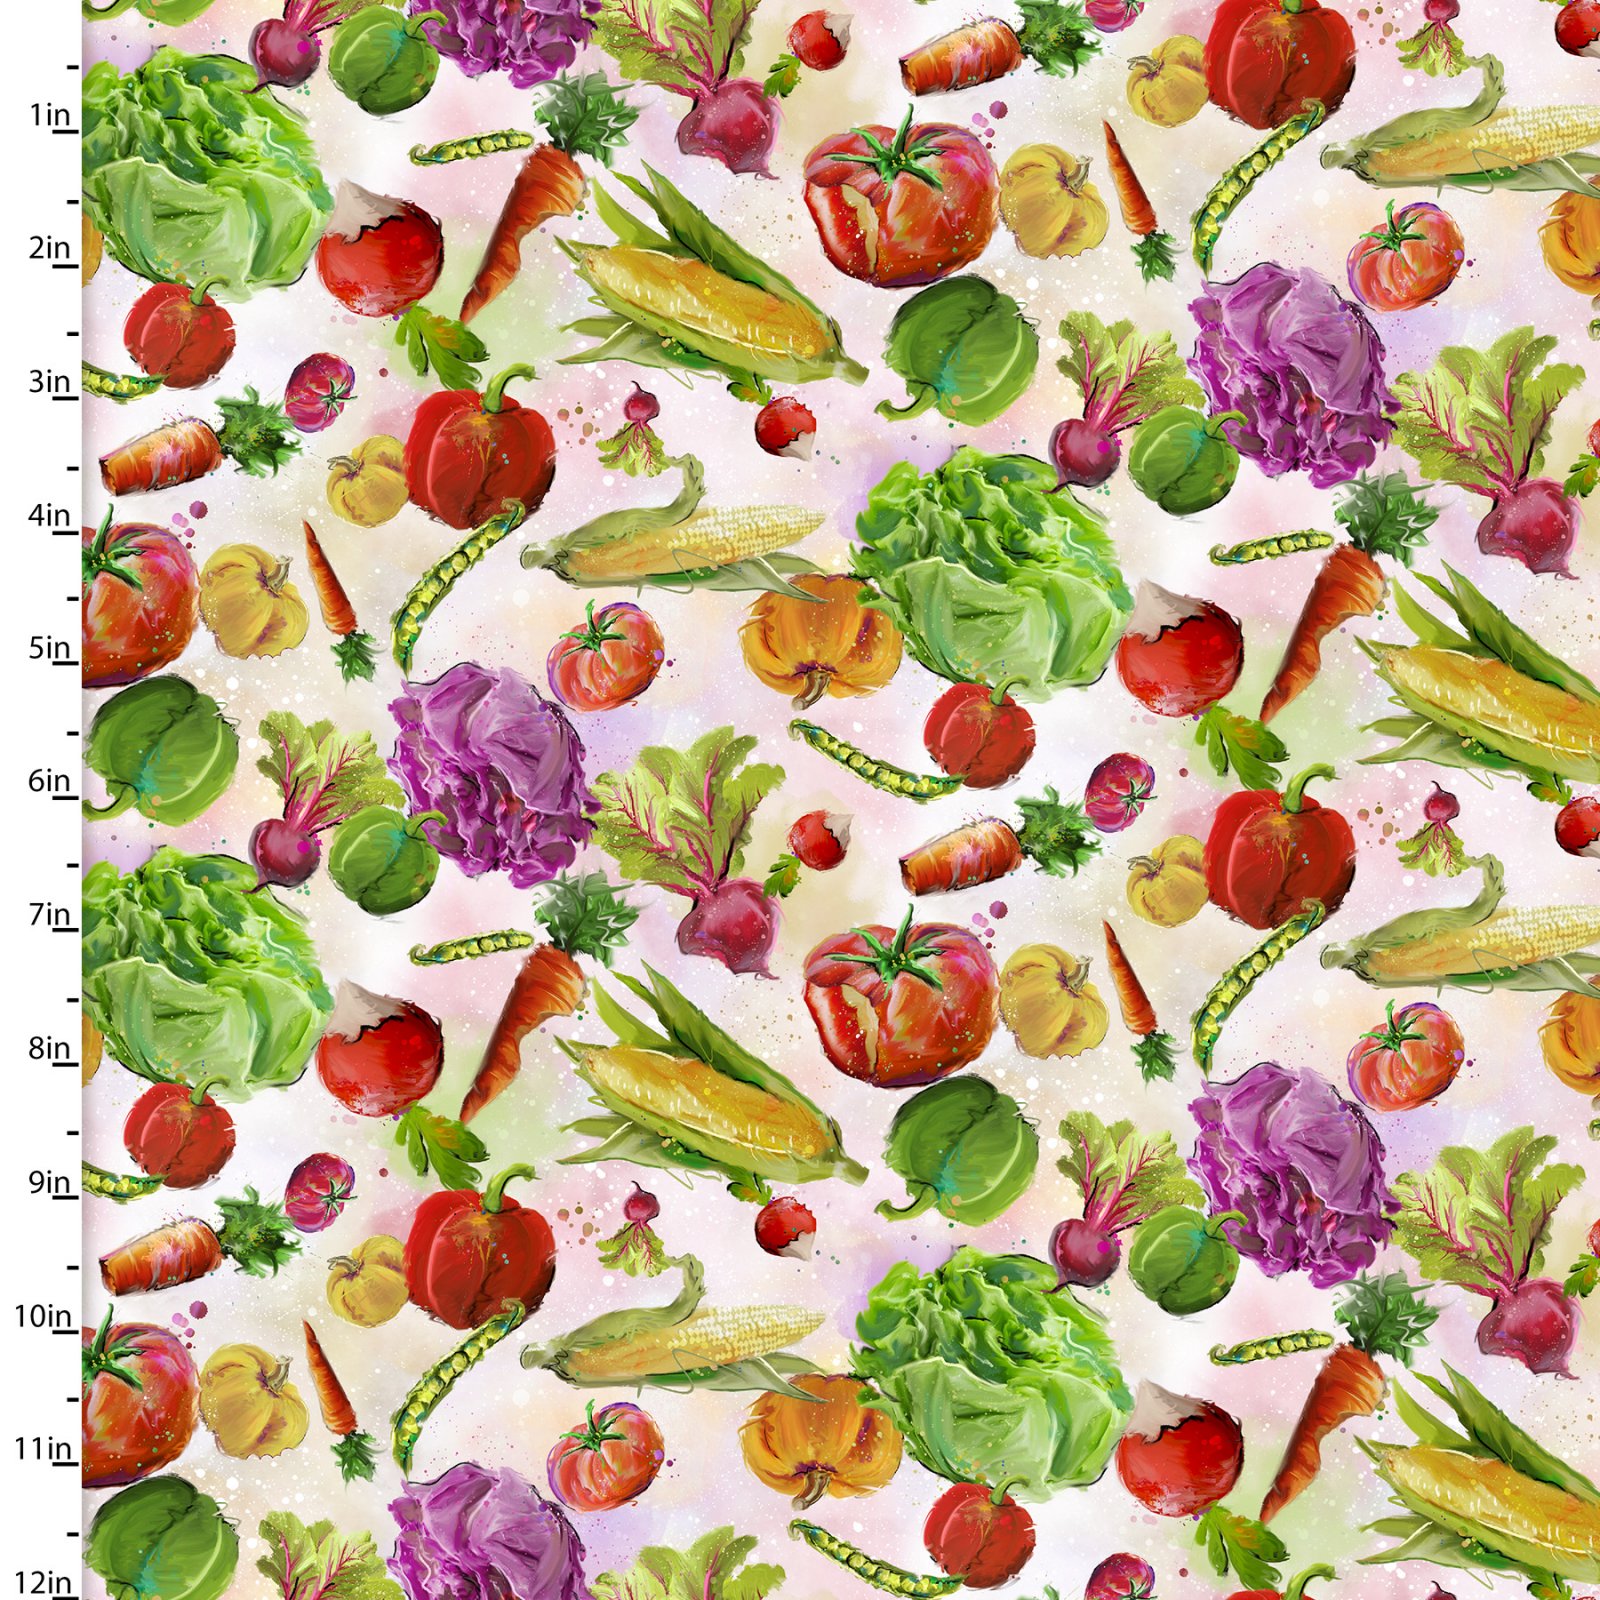 3 Wishes Fabric- Welcome to the Funny Farm Veggies